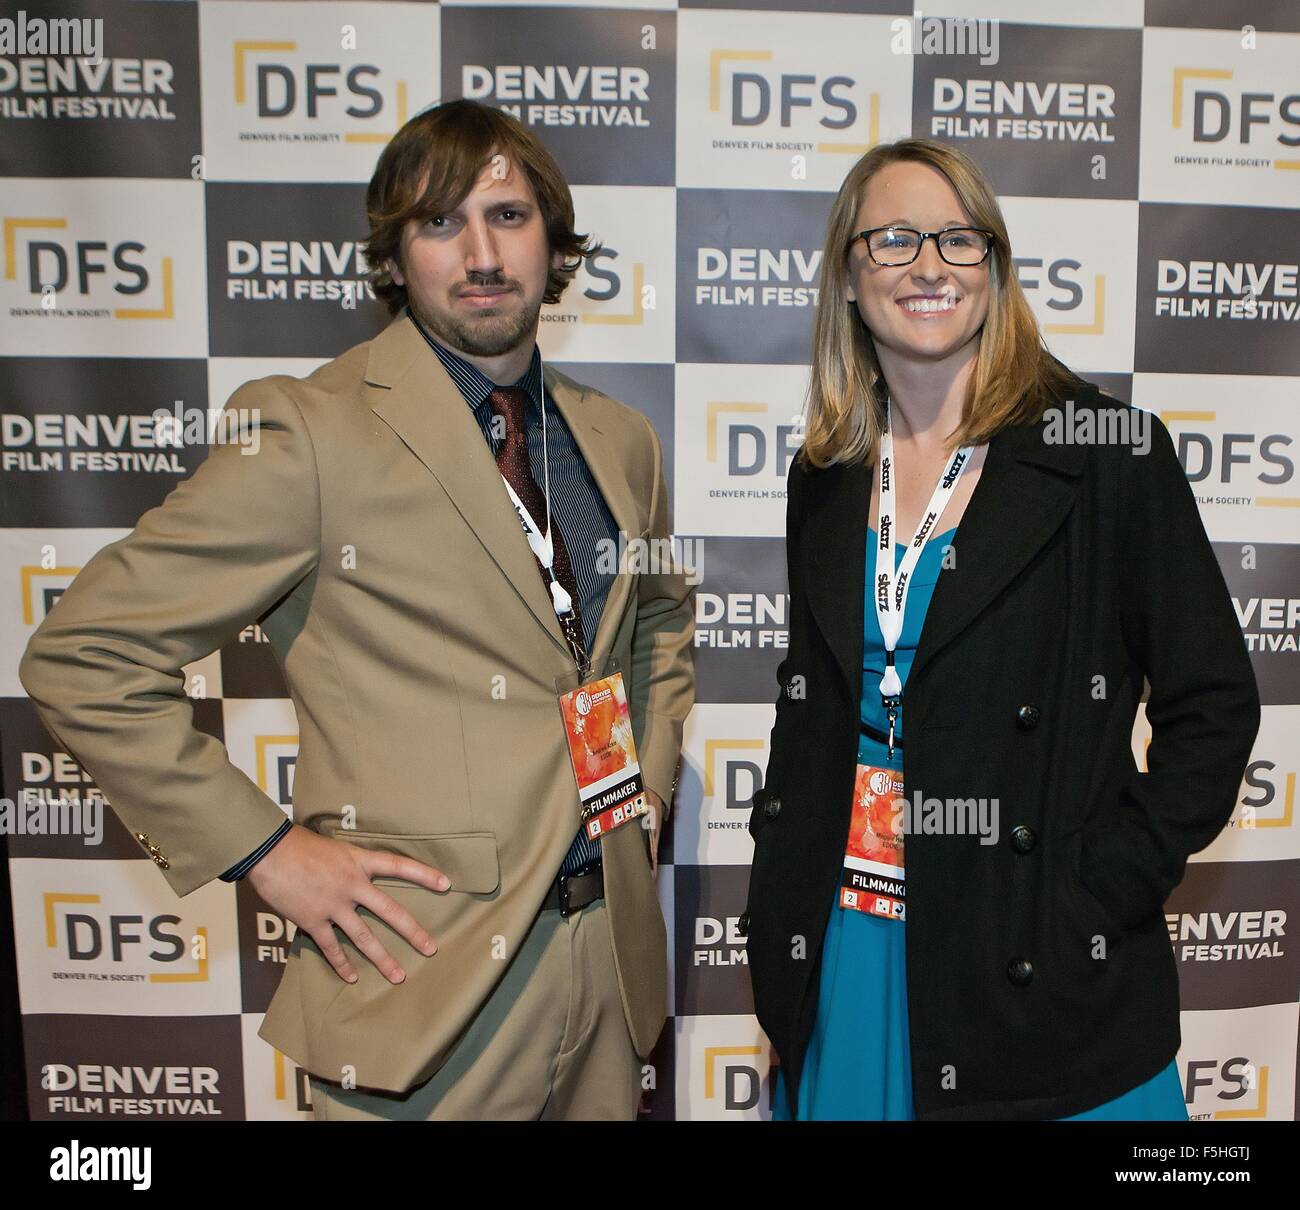 Denver, Colorado, USA. 4th Nov, 2015. Festival Film Directors ANDREW ARKIS, left, and MAGGIE HART, right, of the film ''Eddie'' walk the Red Carpet as the 38th. Denver Film Festival kicks off the screening of Charlie Kaufman's Black Comedy Anomalisa at the Ellie Caulkins Opera House at the Denver Center for the Performing Arts Wed. night. Credit:  Hector Acevedo/ZUMA Wire/Alamy Live News Stock Photo